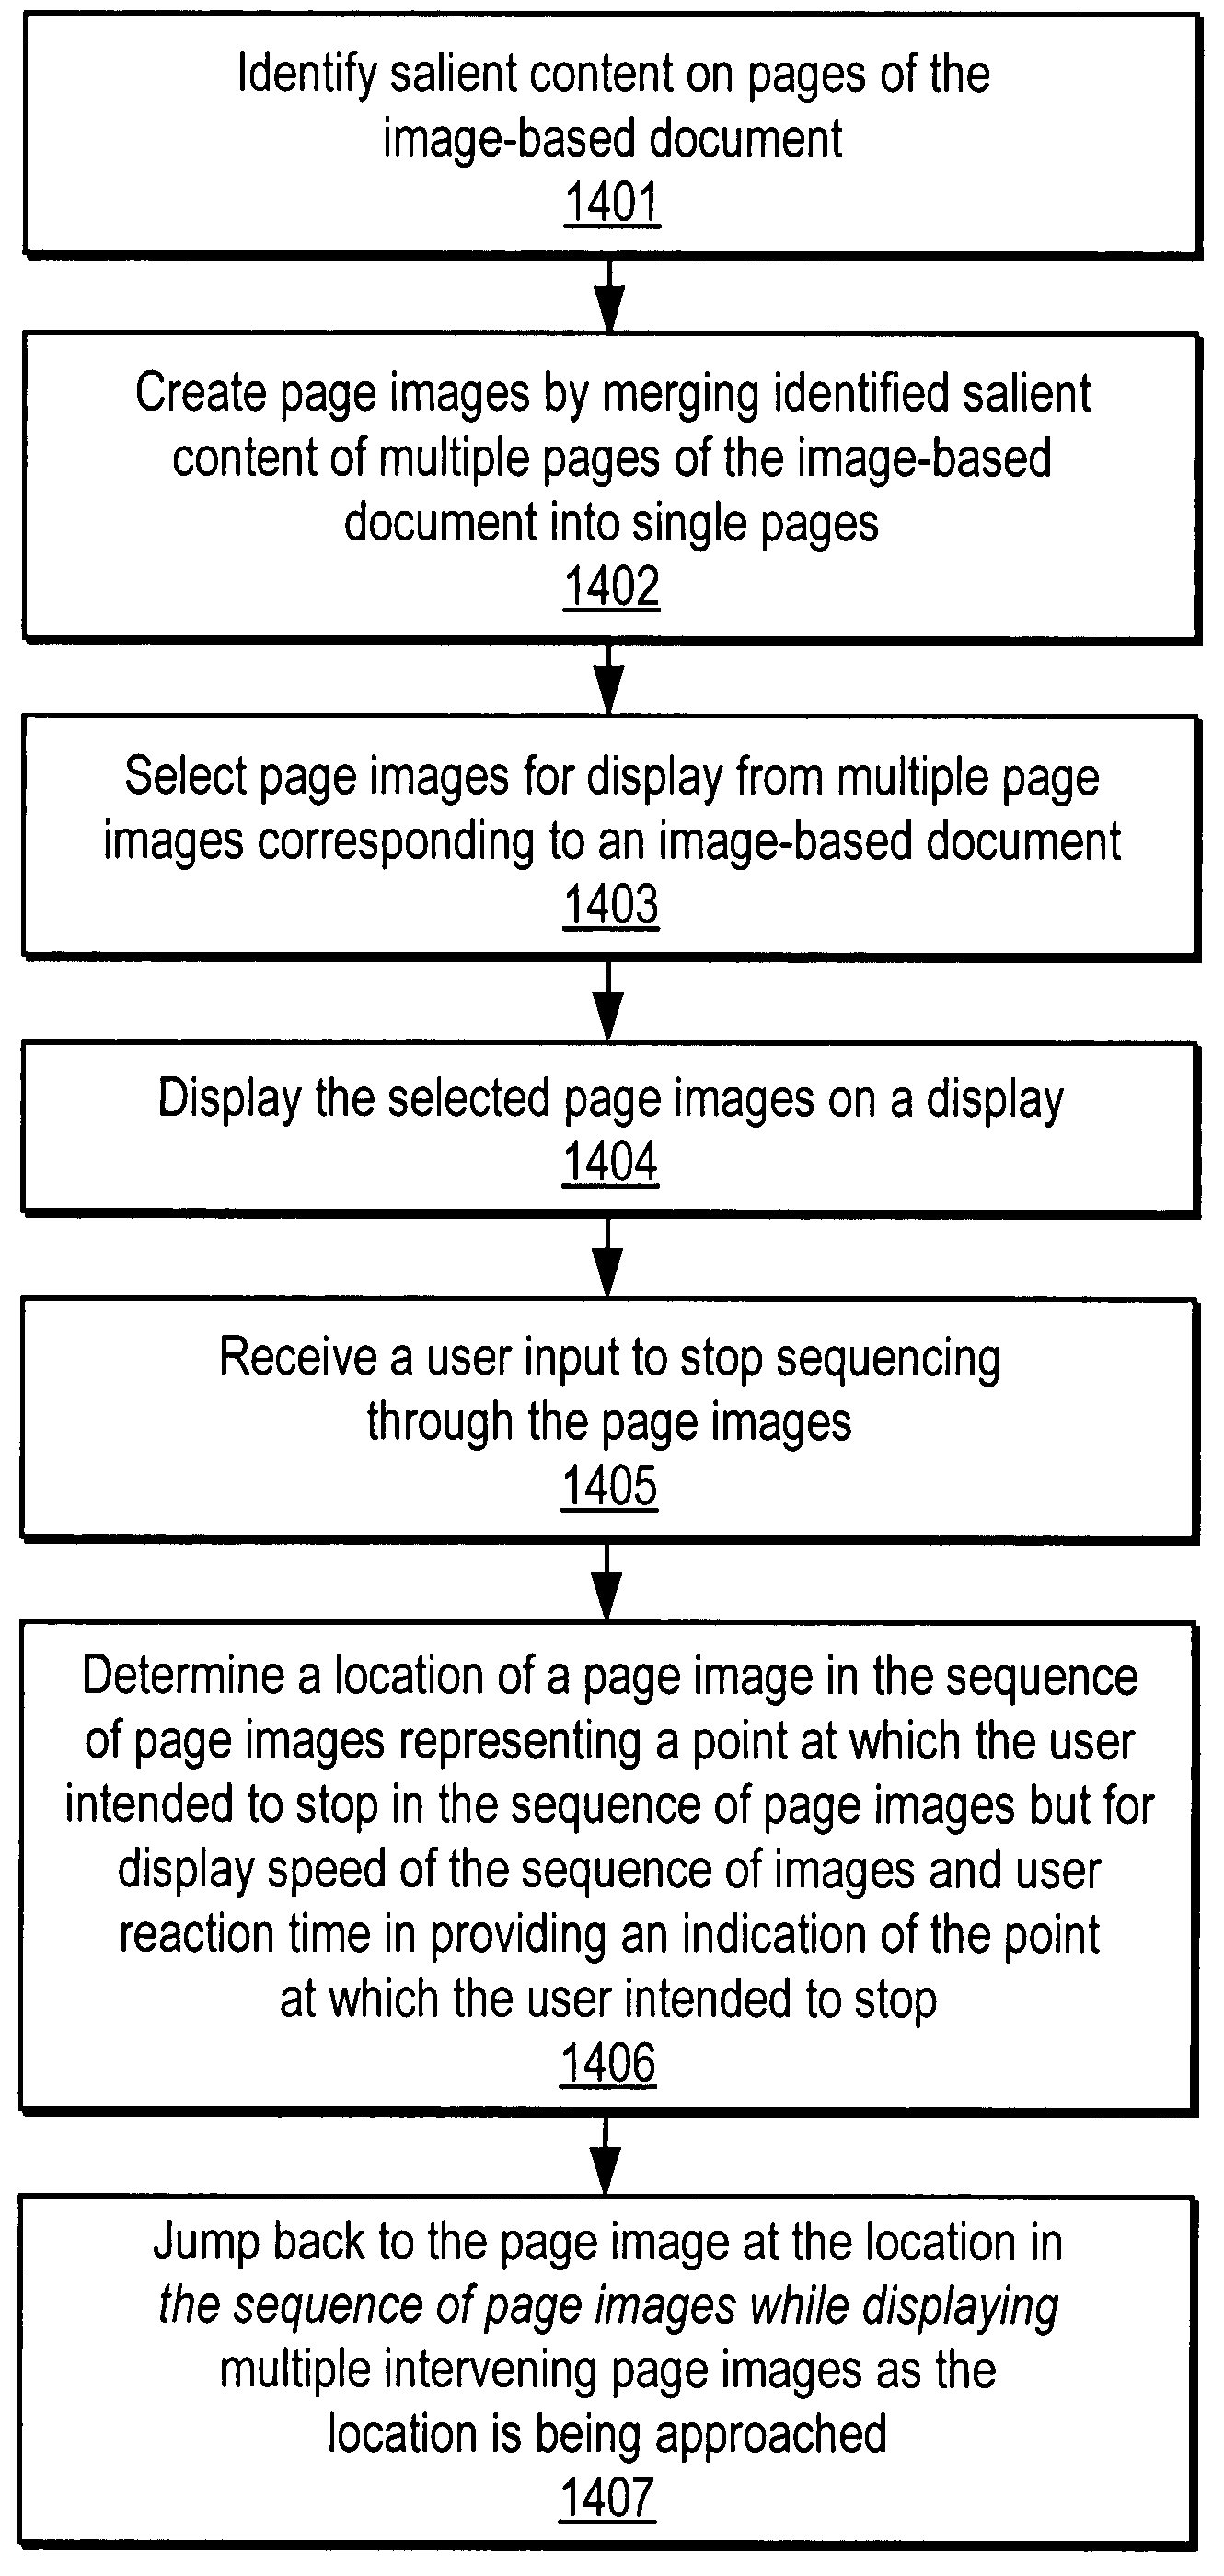 Avoiding disorientation under discontinuous navigation in an image flipping system